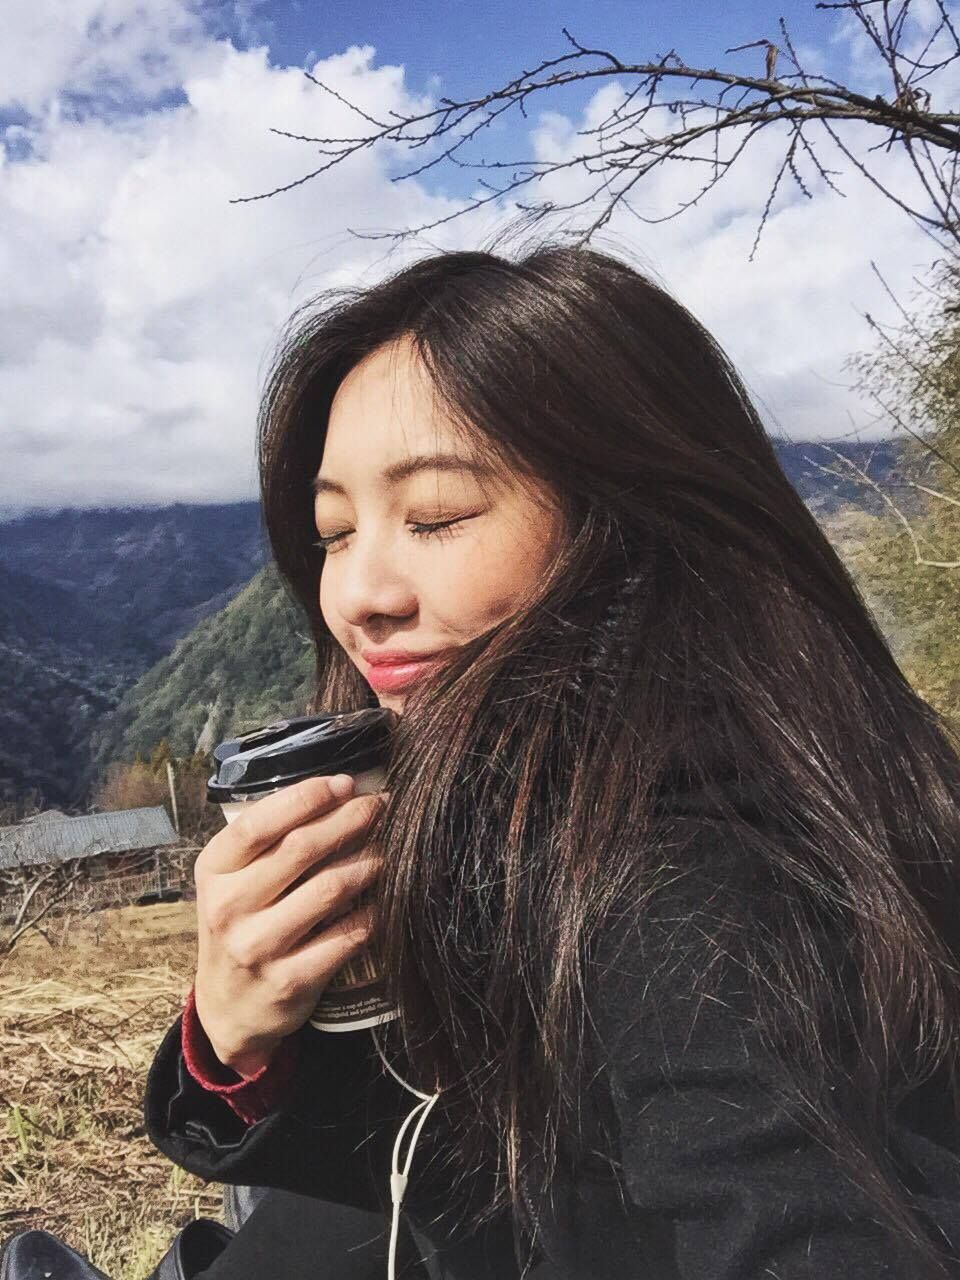 Hairstyle, People in nature, Black hair, Long hair, Street fashion, Drinking, Step cutting, Camera, Dessert, Valley, 